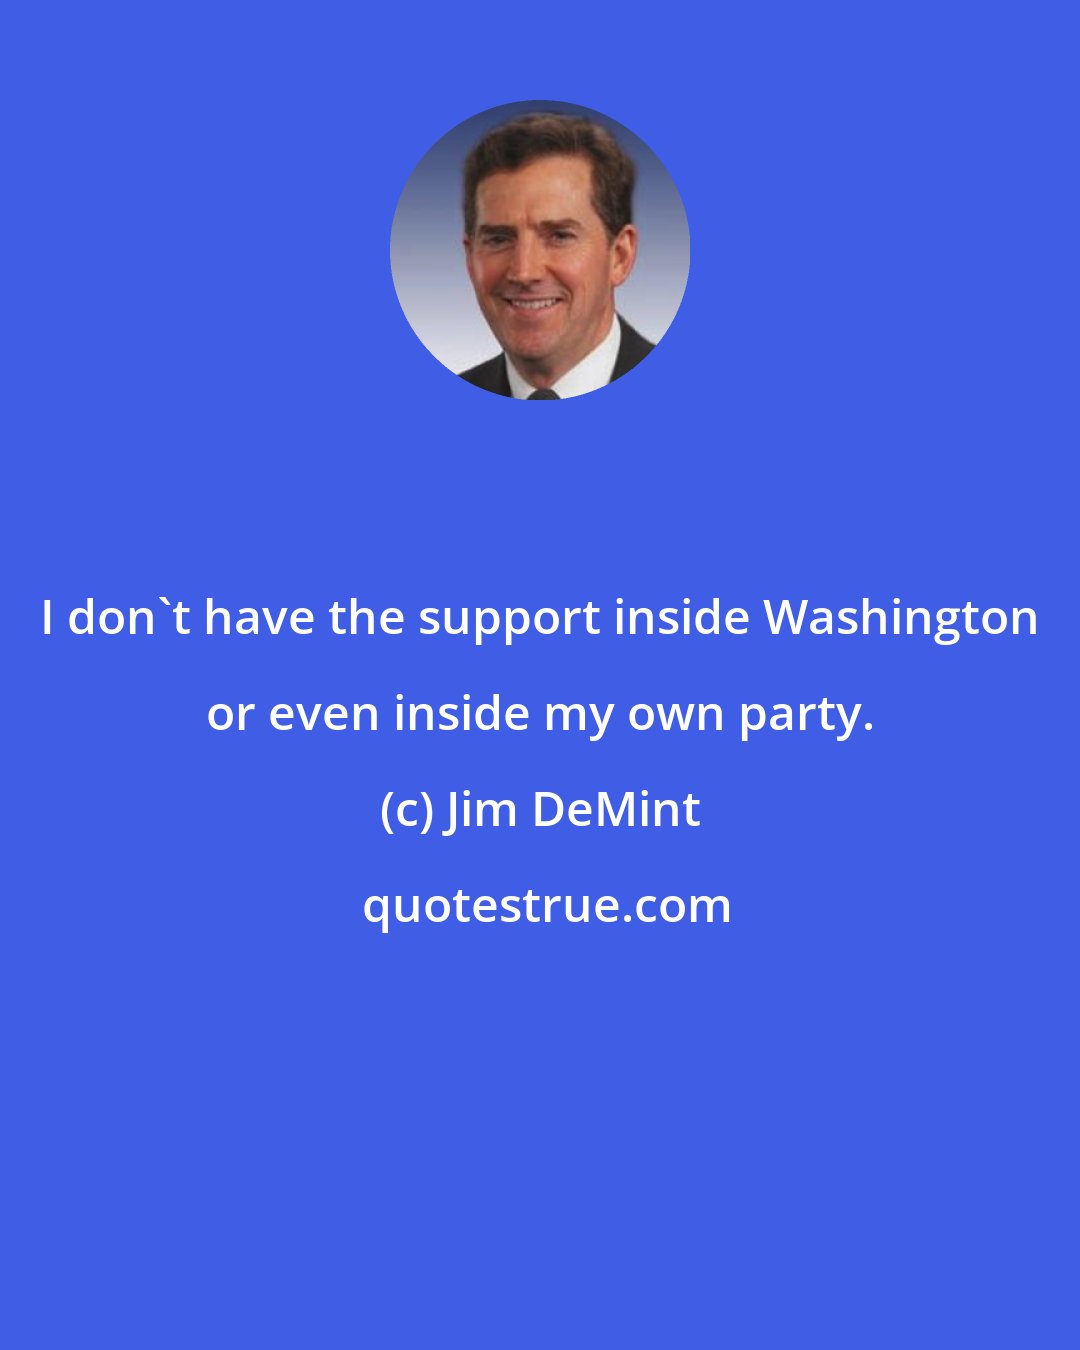 Jim DeMint: I don't have the support inside Washington or even inside my own party.